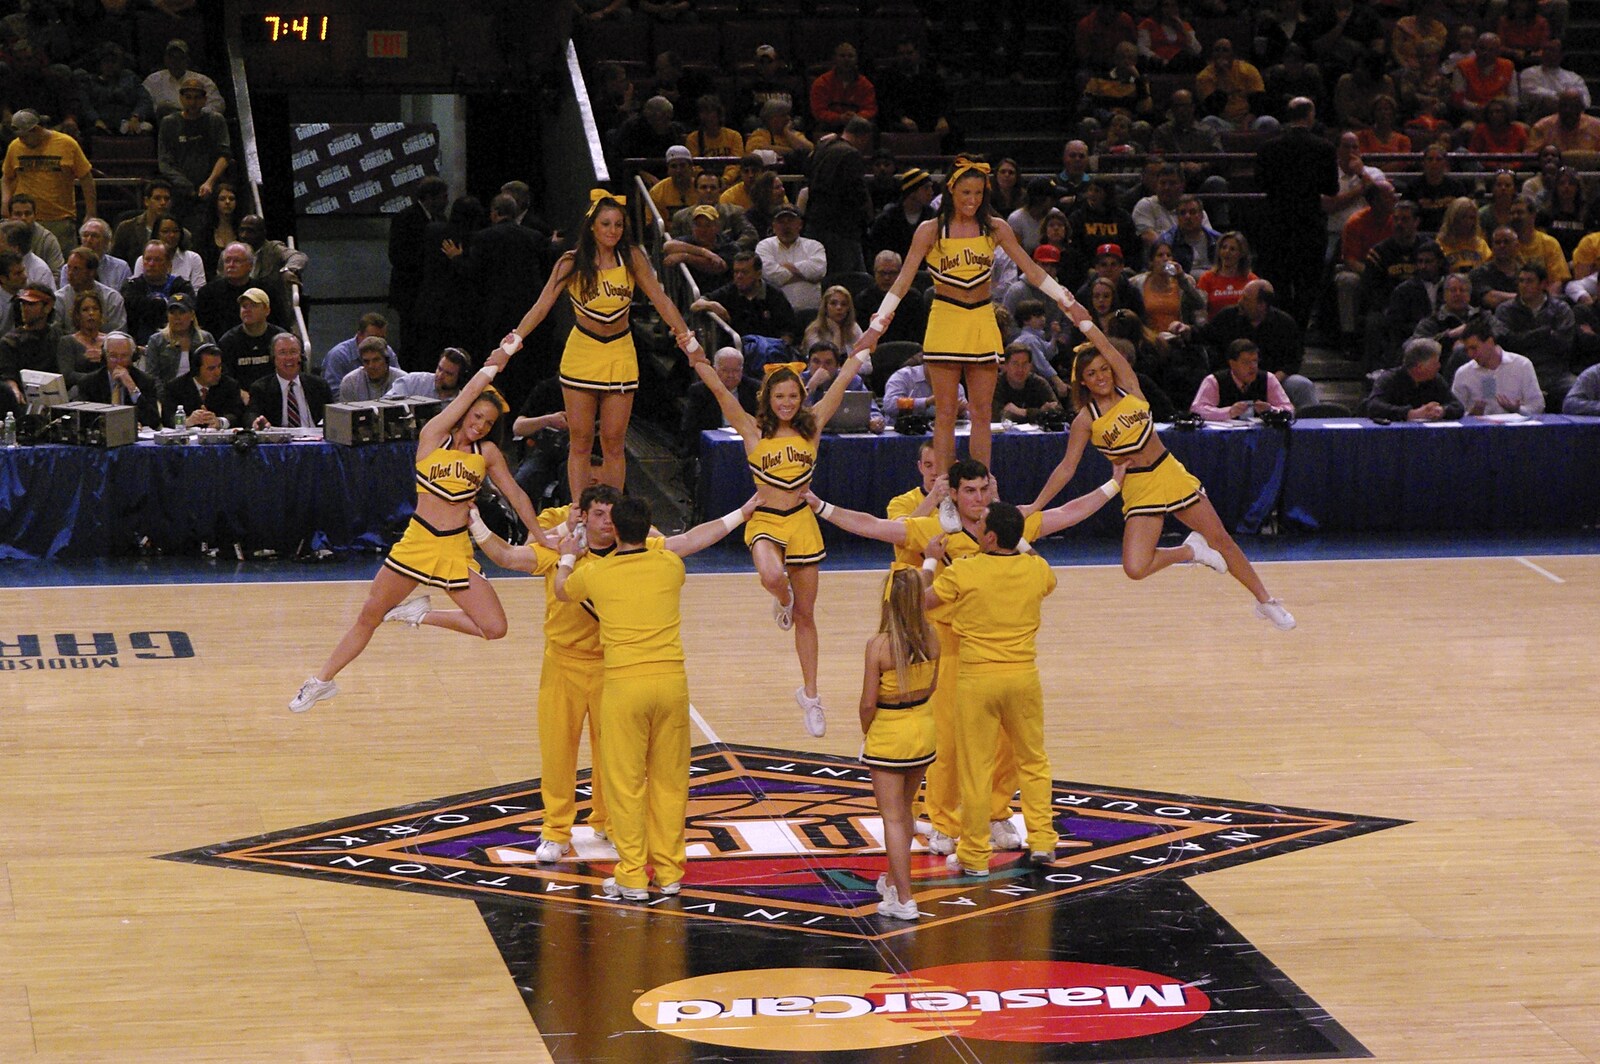 Liberty Island, A Helicopter Trip and Madison Square Basketball, New York, US - 27th March 2007: West Virginia's cheerleaders do some acrobatics